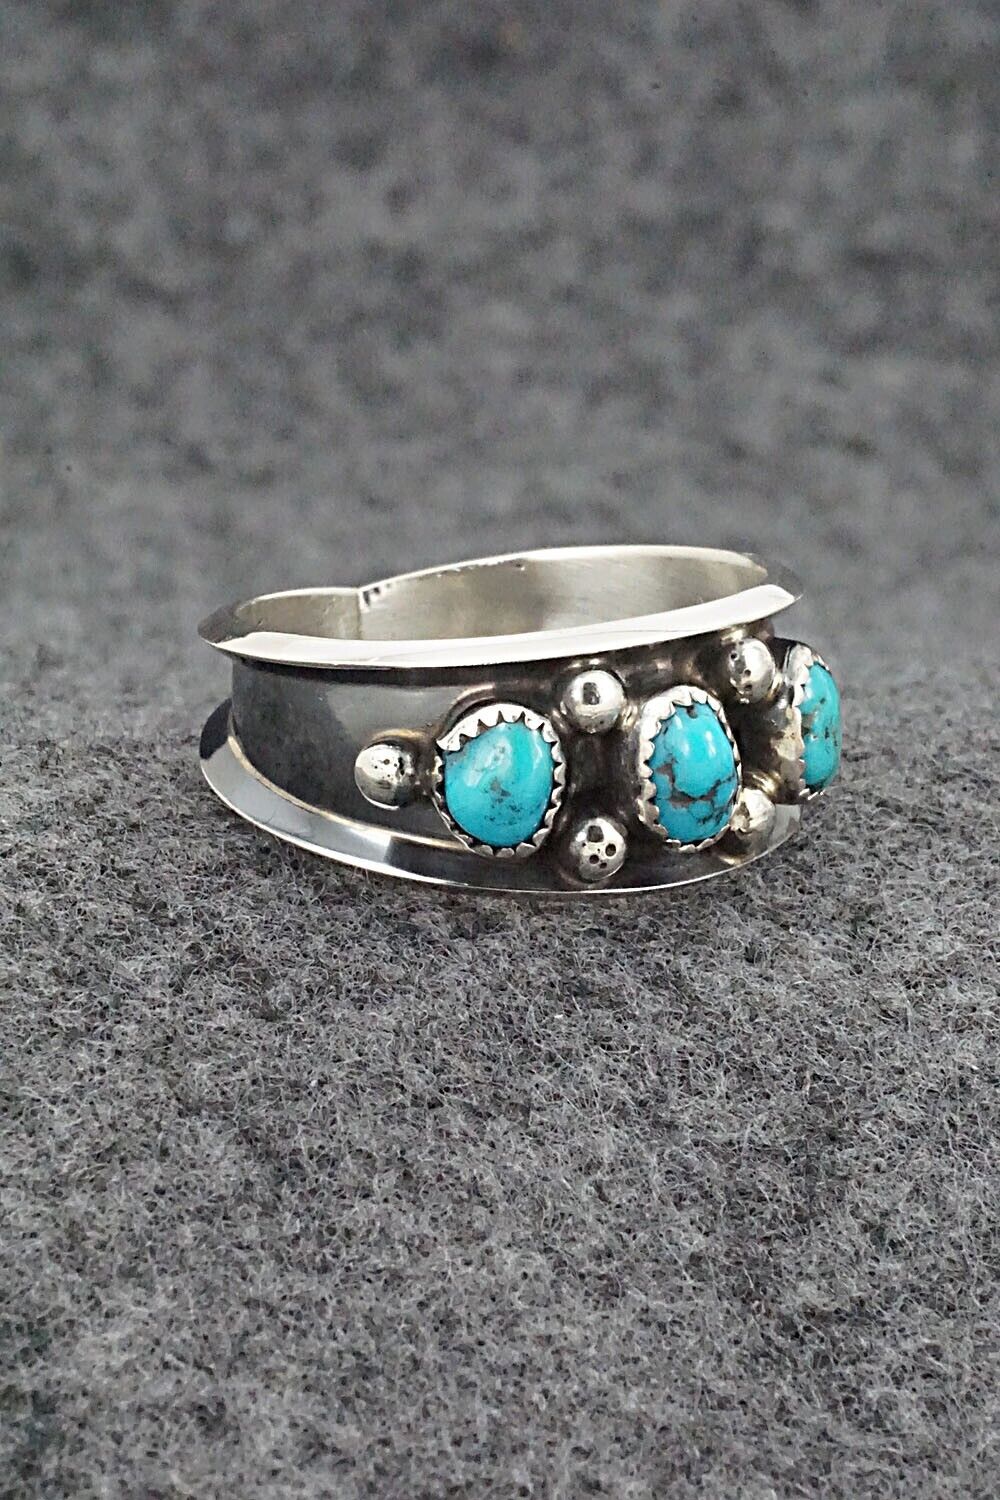 Turquoise & Sterling Silver Ring - Paul Largo - Size 12.5